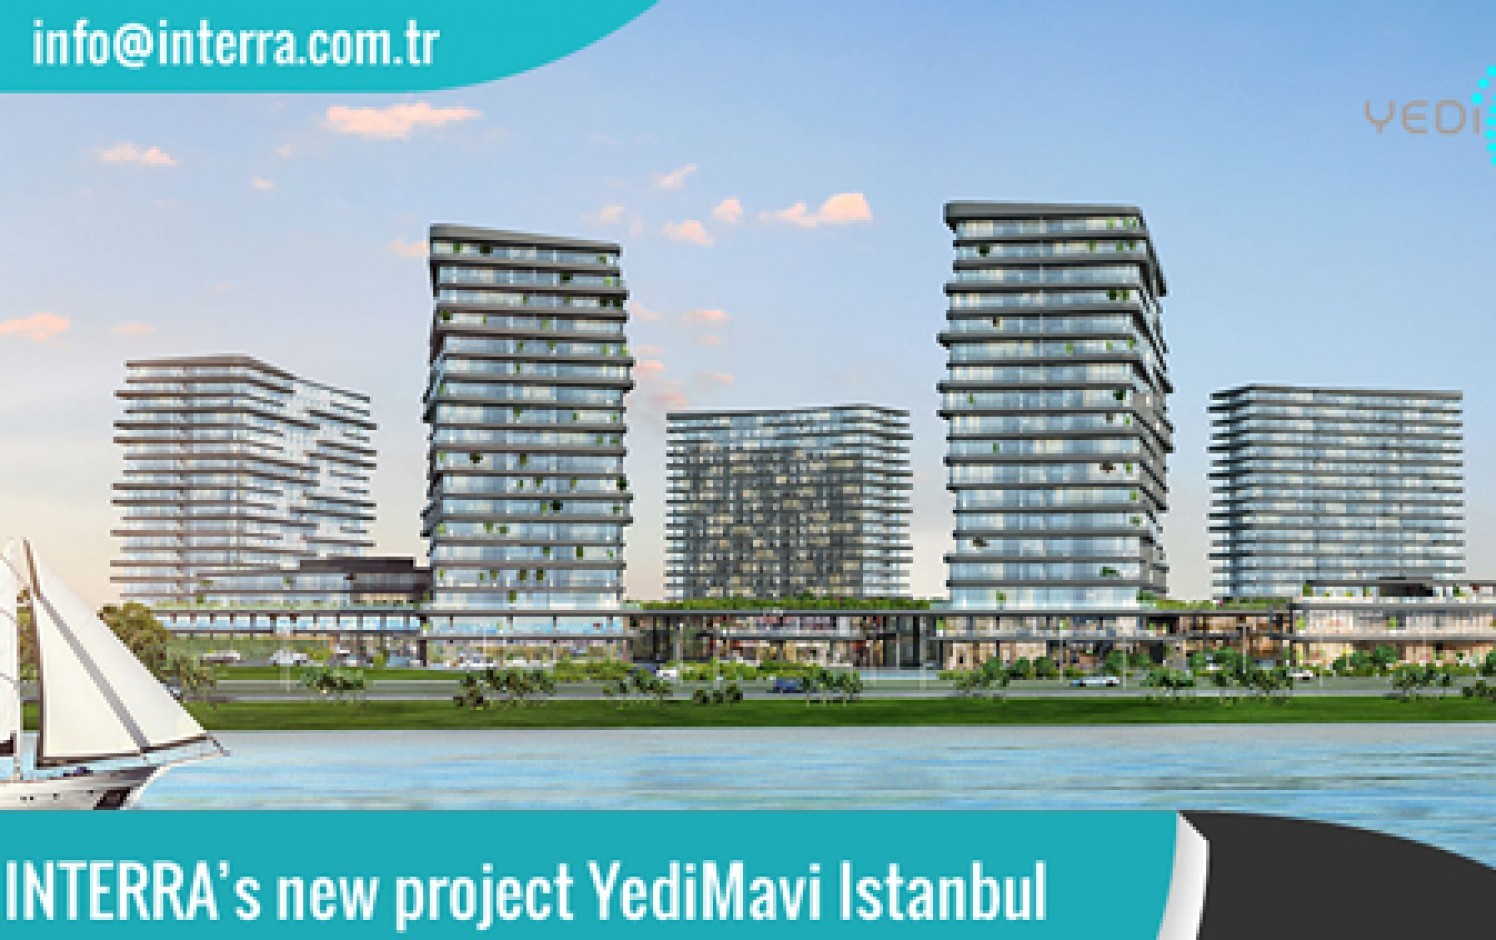 Interra Iswıtch Has Begun To Be Used In Prestıgıous Projects